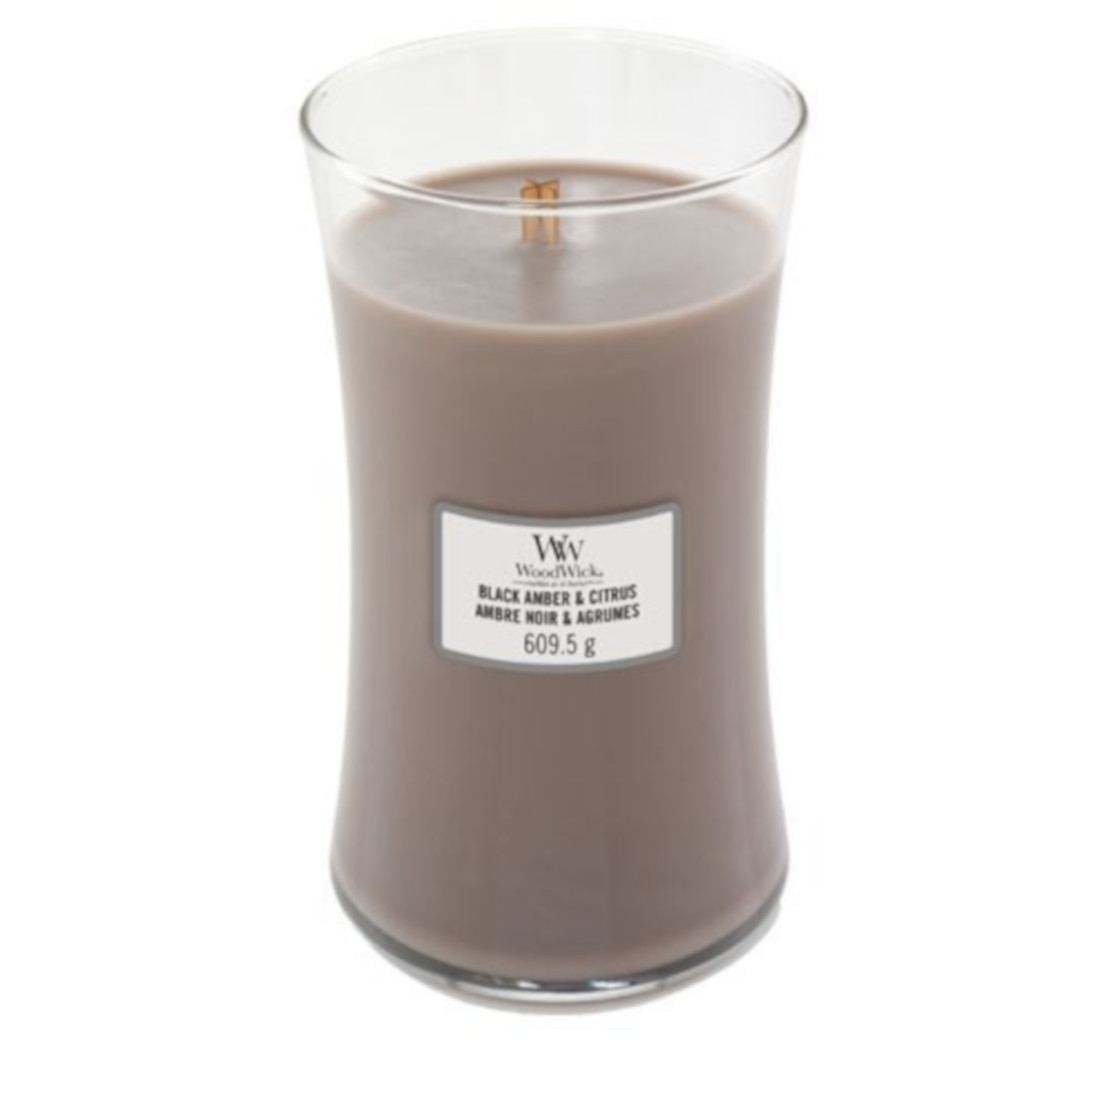 Woodwick Black Amber and Citrus Large Jar Candle